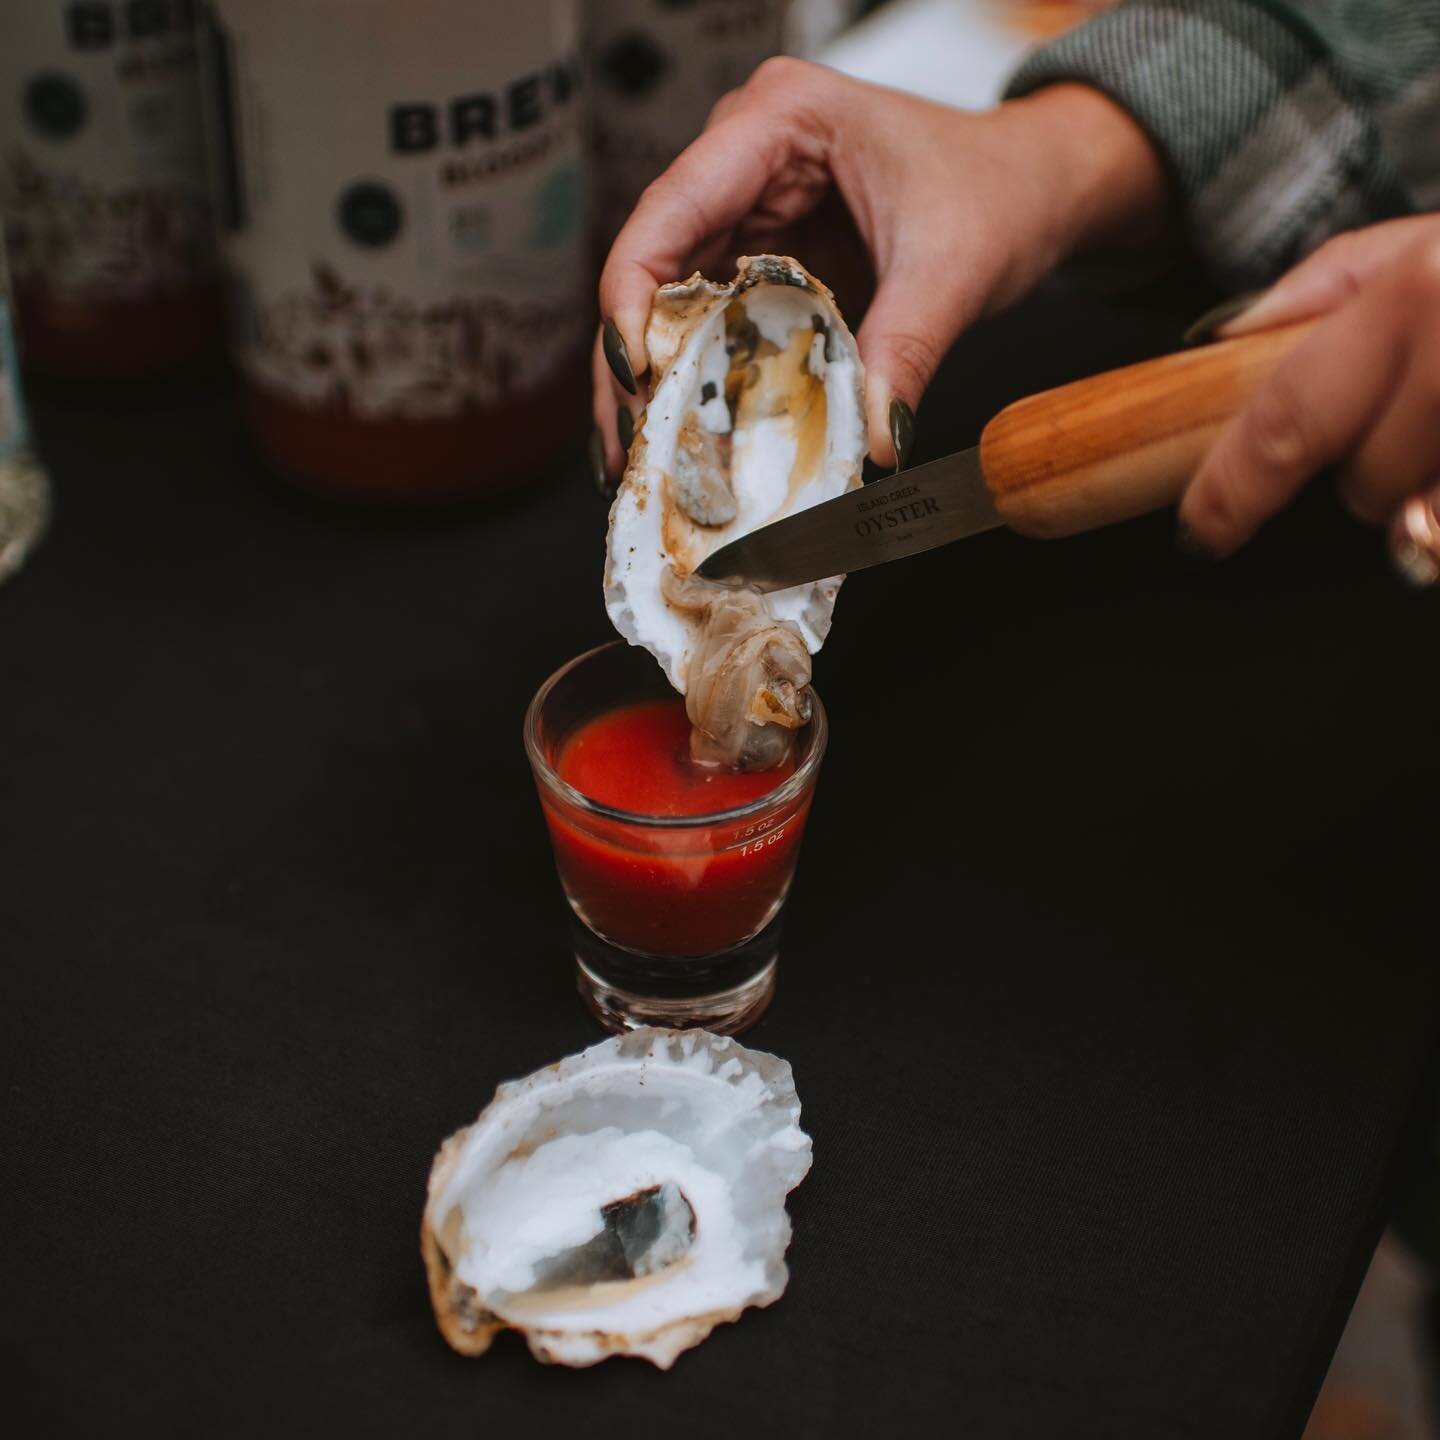 Happy Thanksgiving week! Getting your menu together for Thursday? How about Oyster Shooters?⁣
⁣
WHAT YOU WILL NEED:⁣
Bloody Caesar mix⁣
Vodka⁣
Oysters⁣
⁣
#bloodymarymix #bloodymarys #bloodycaesar #bloodycaesars #margaritamix #margs #margslife #margso